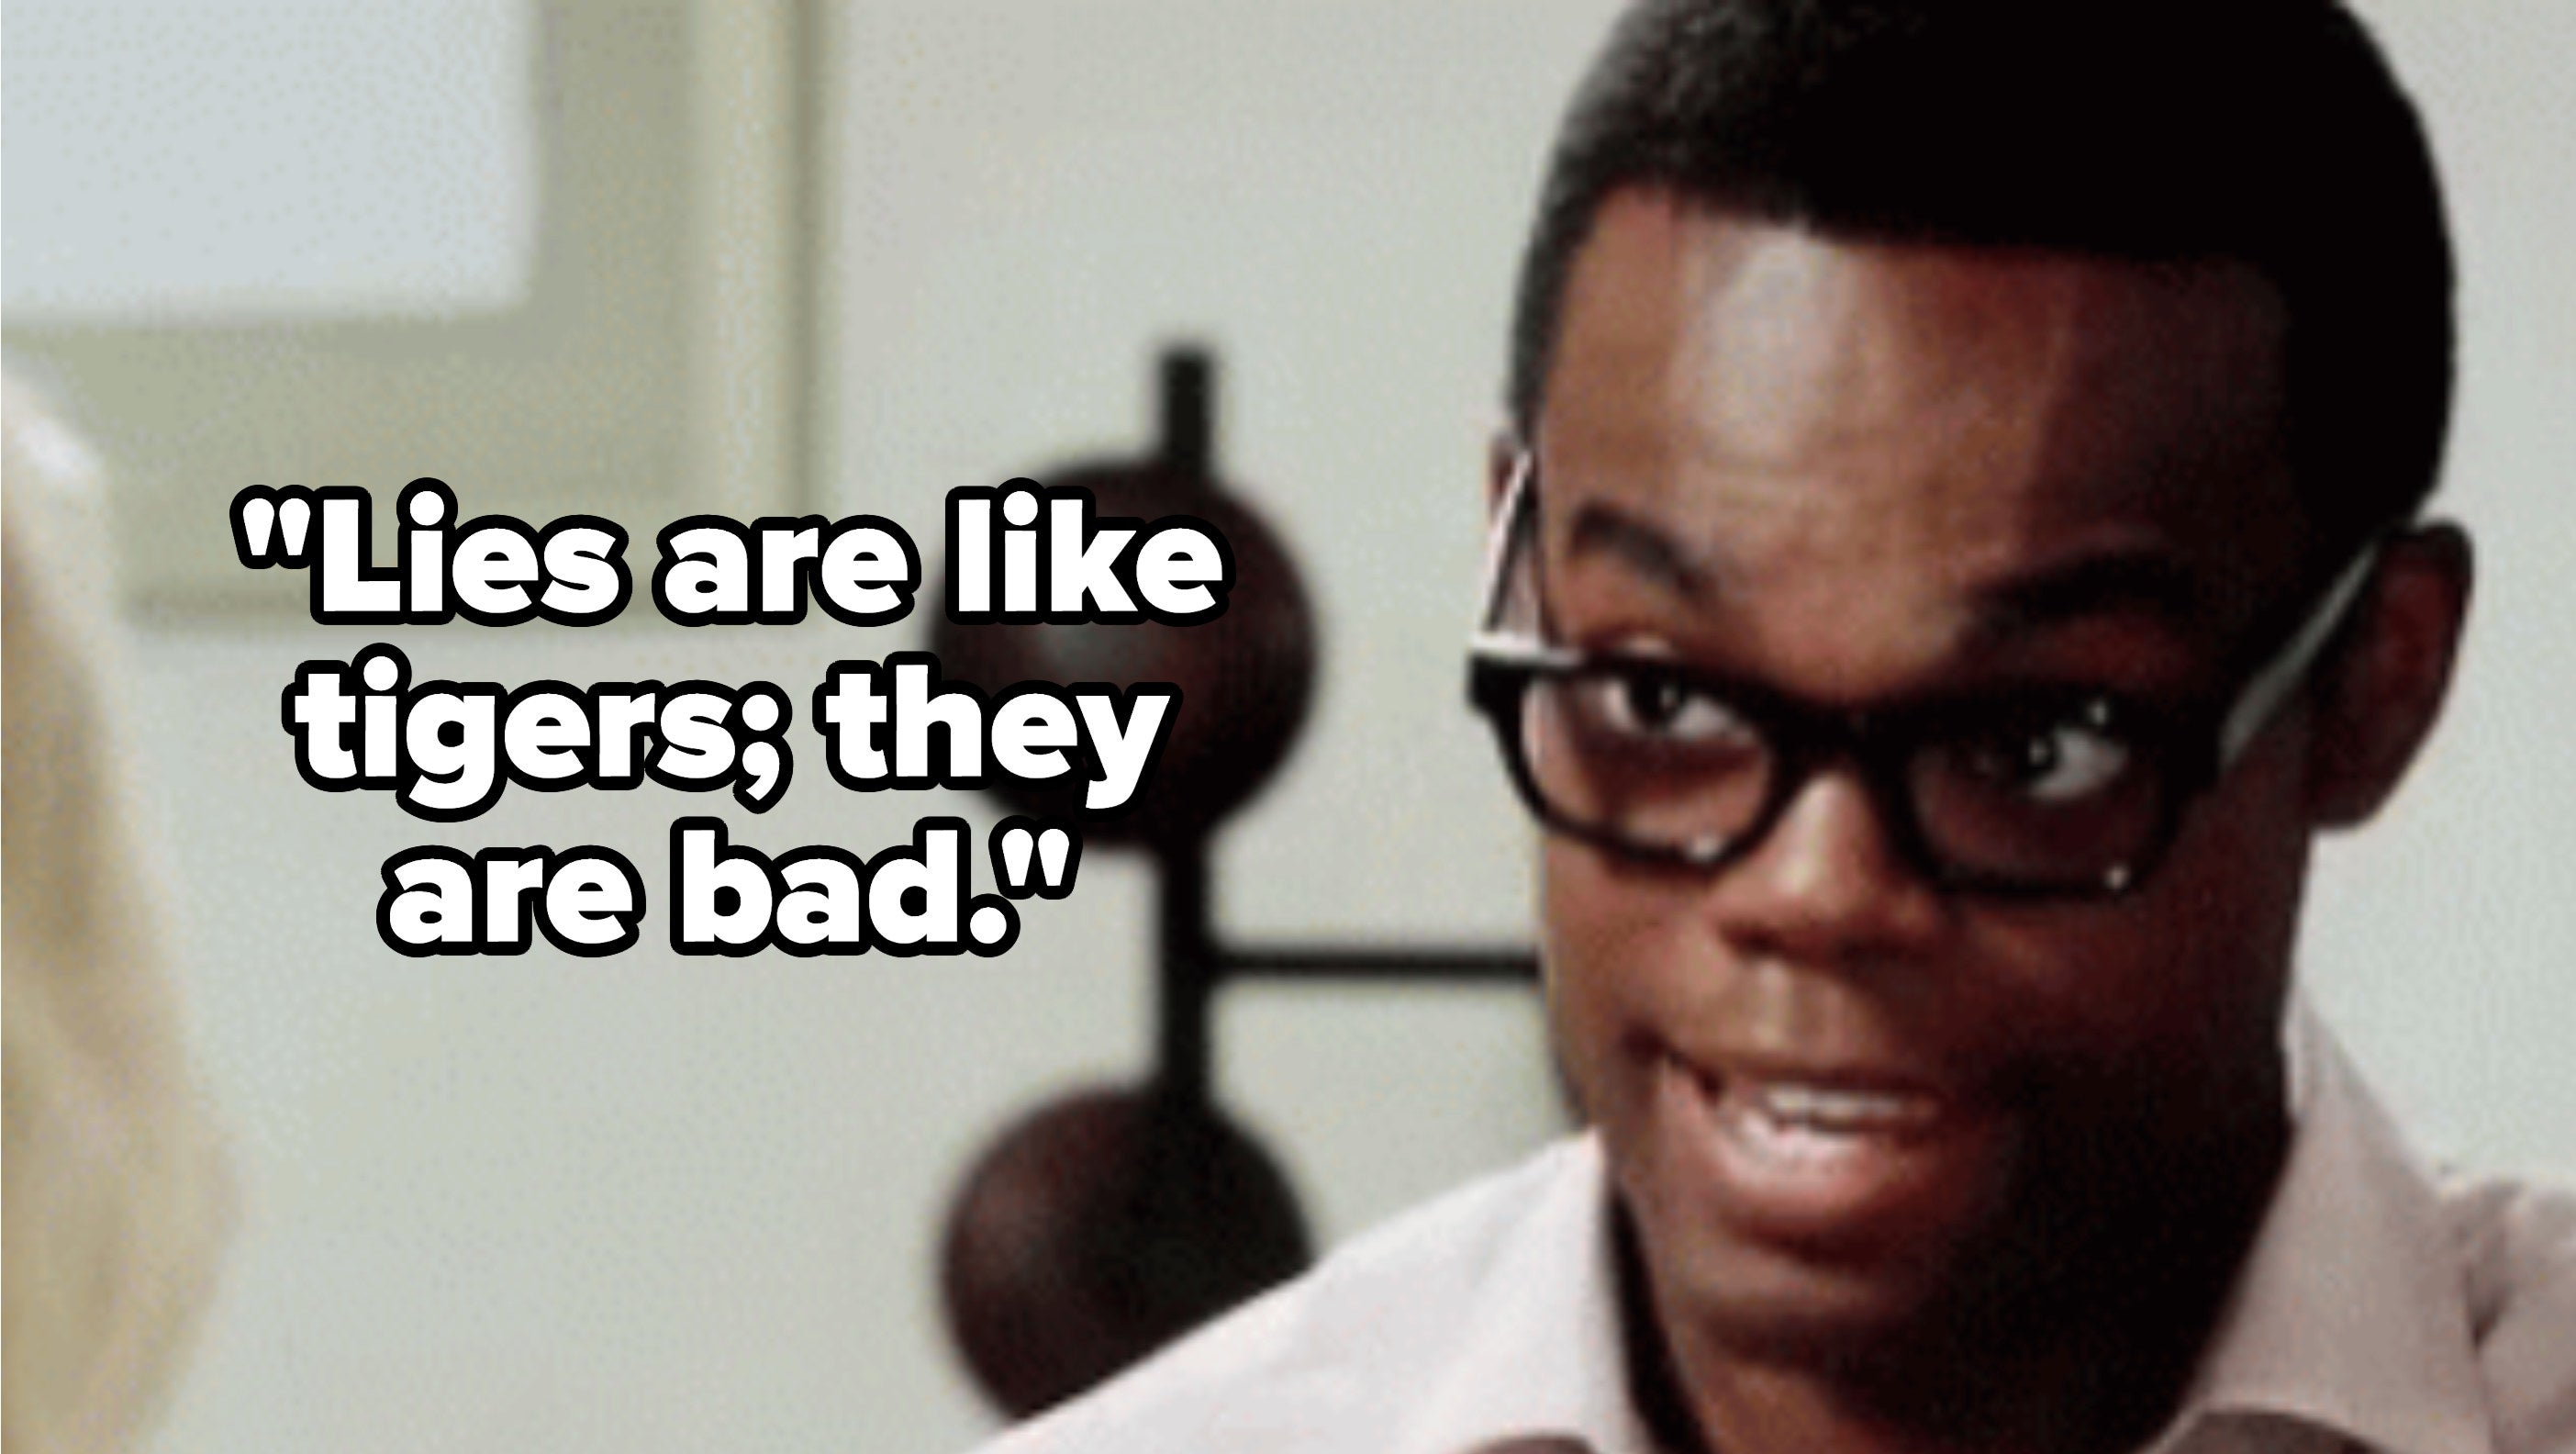 Chidi saying &quot;lies are like tigers, they are bad&quot;